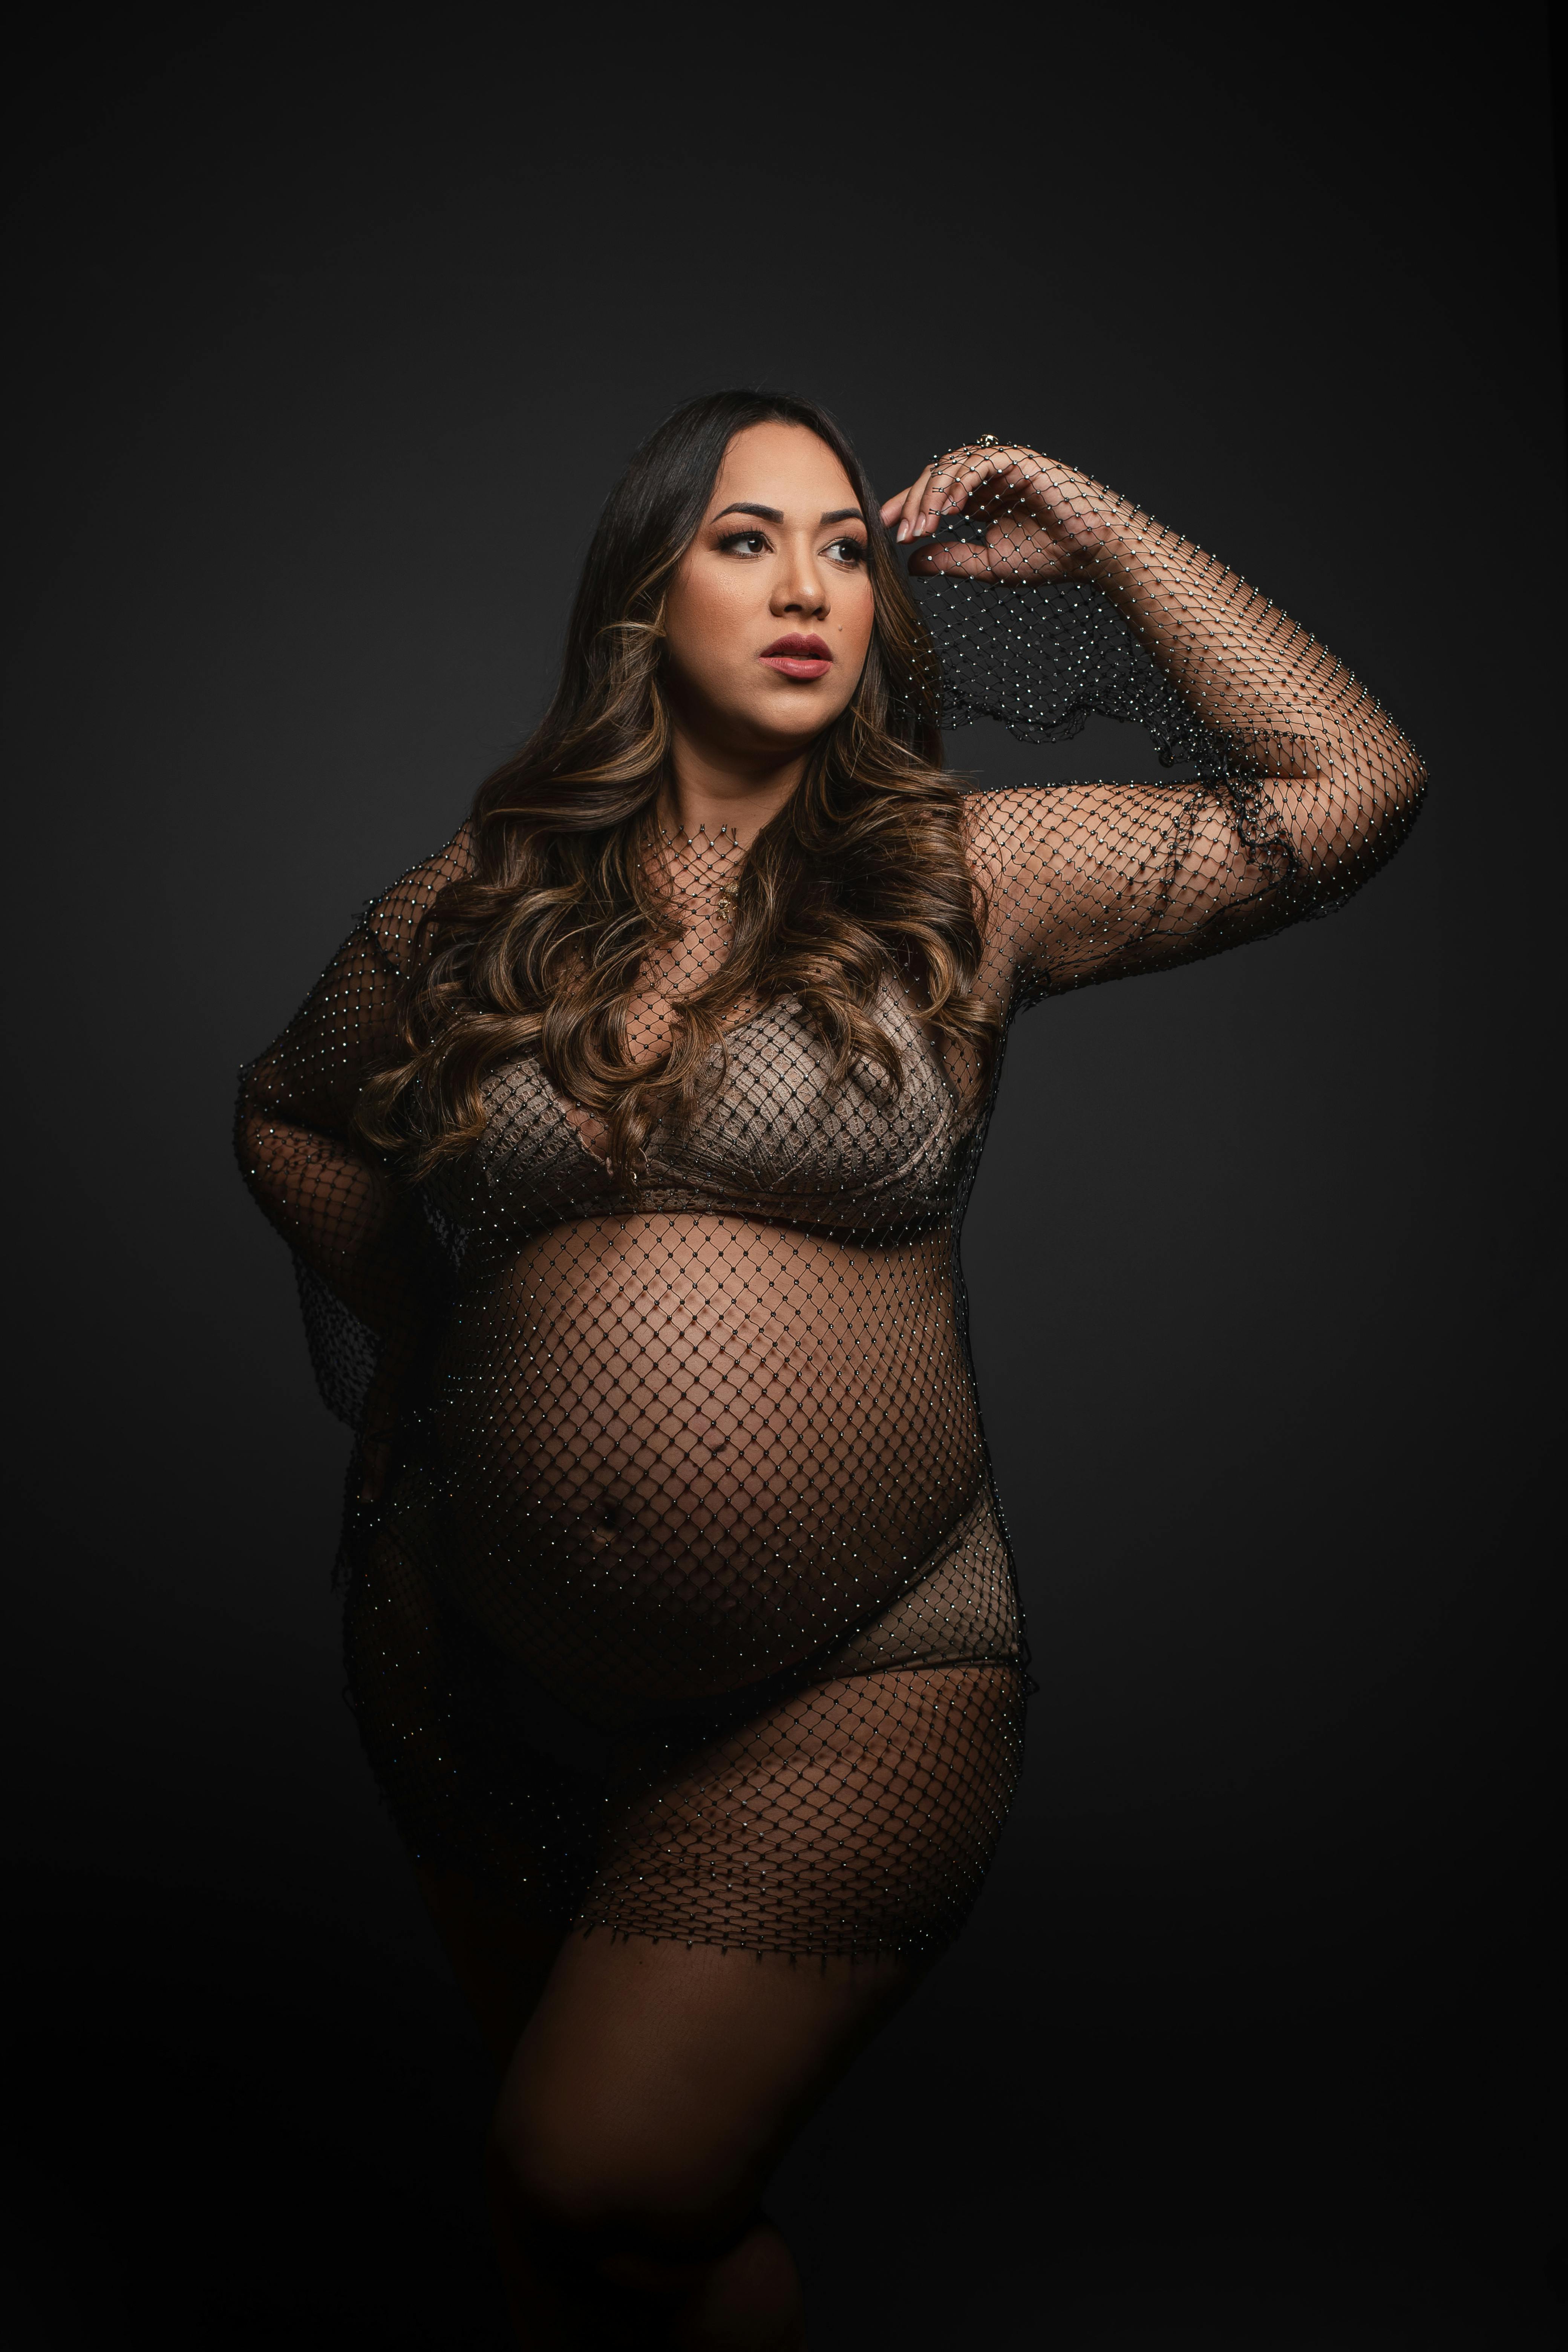 Pregnant Woman in Fishnet Lingerie · Free Stock Photo